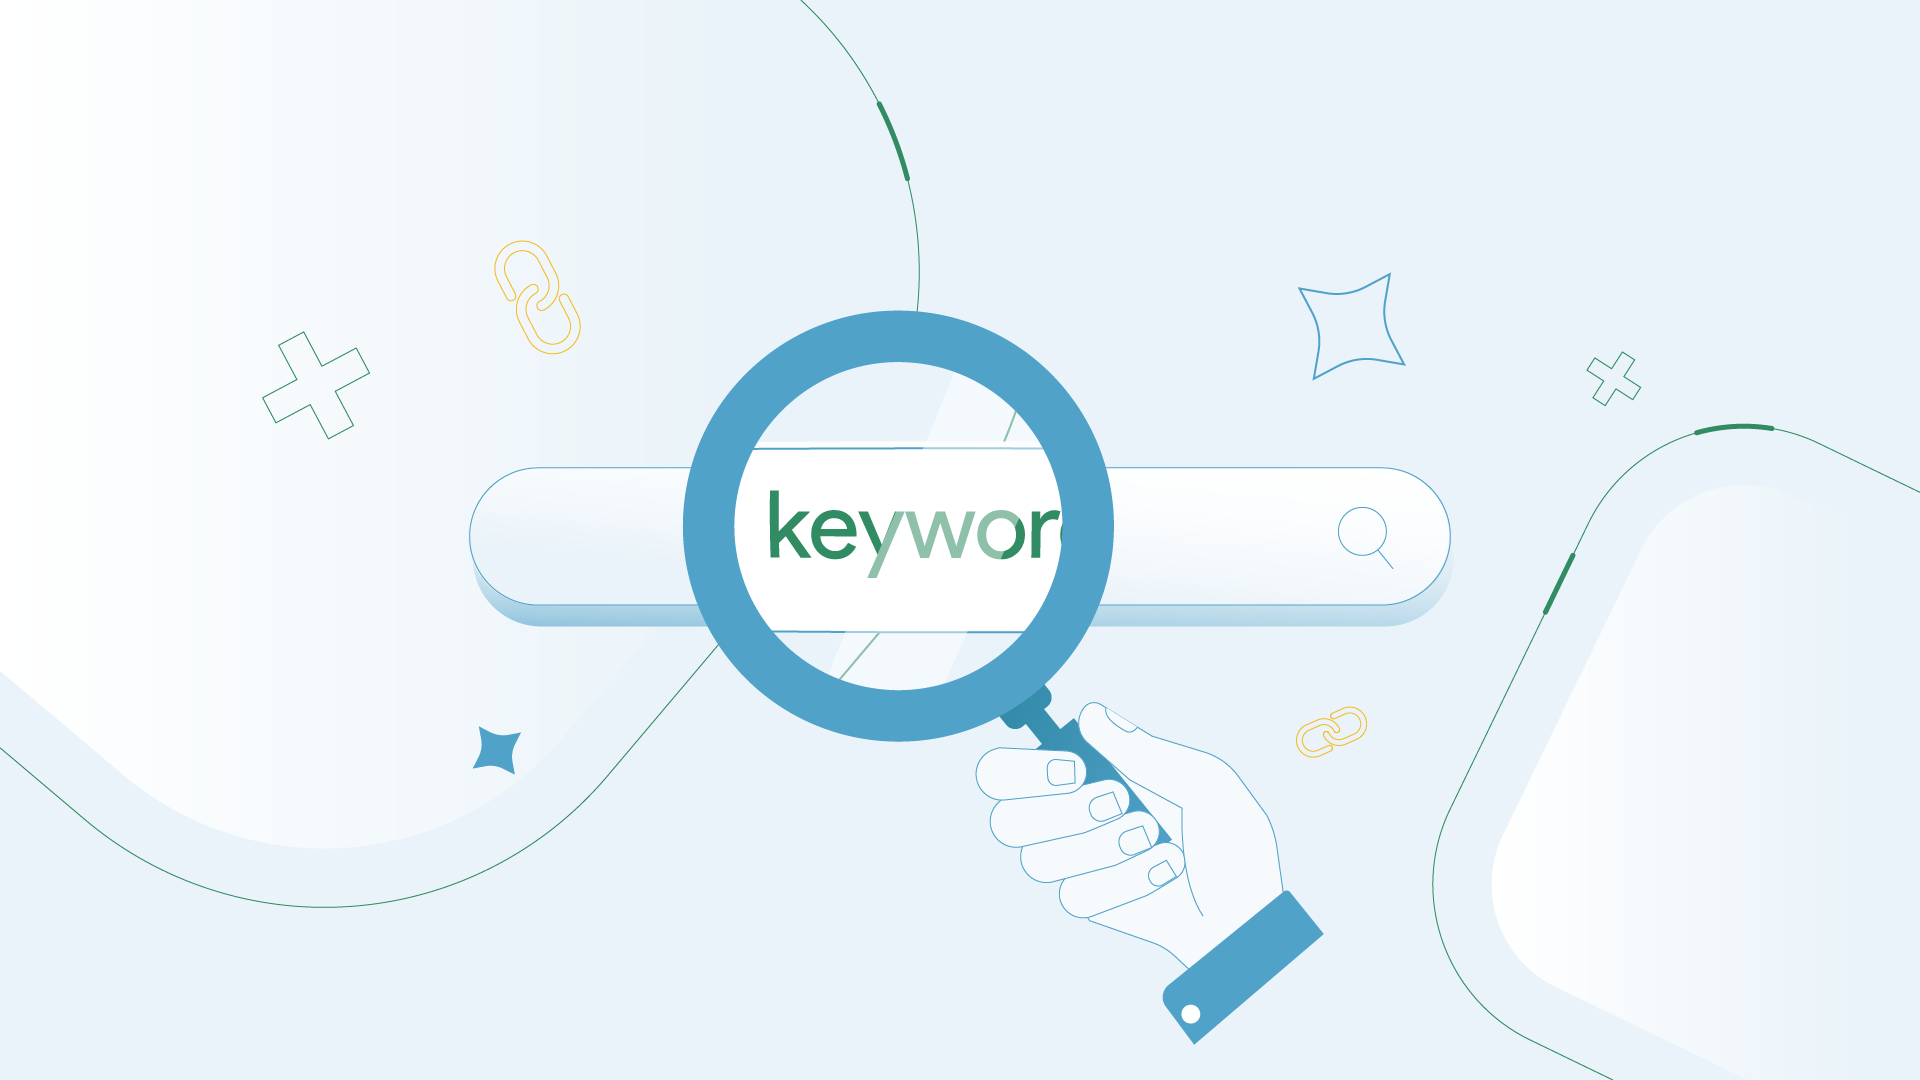 How to do keyword research to find the right keywords for your blog content.